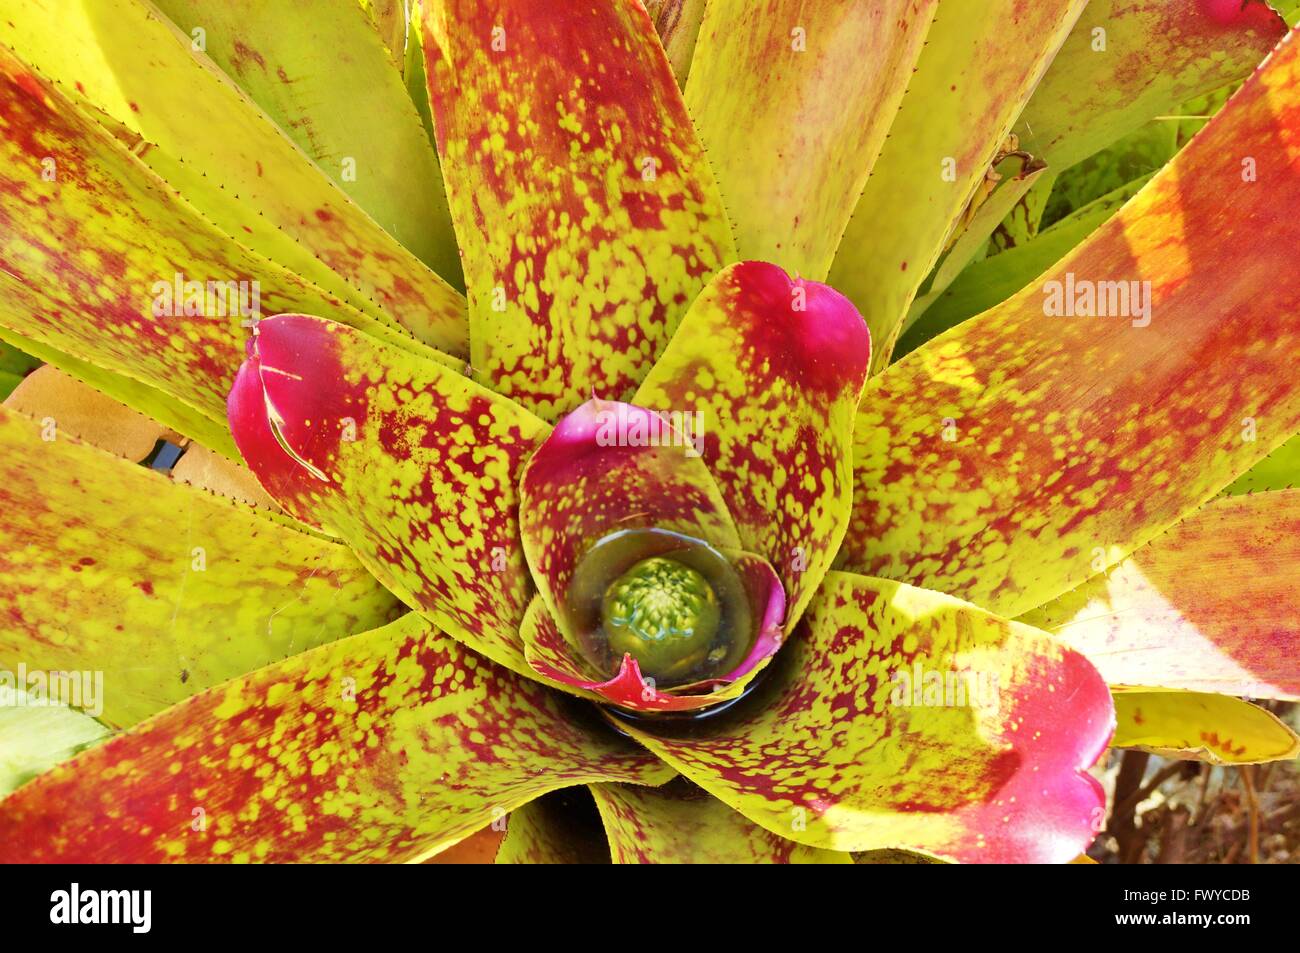 Pink and yellow Bromeliad plant rosette of leaves Stock Photo